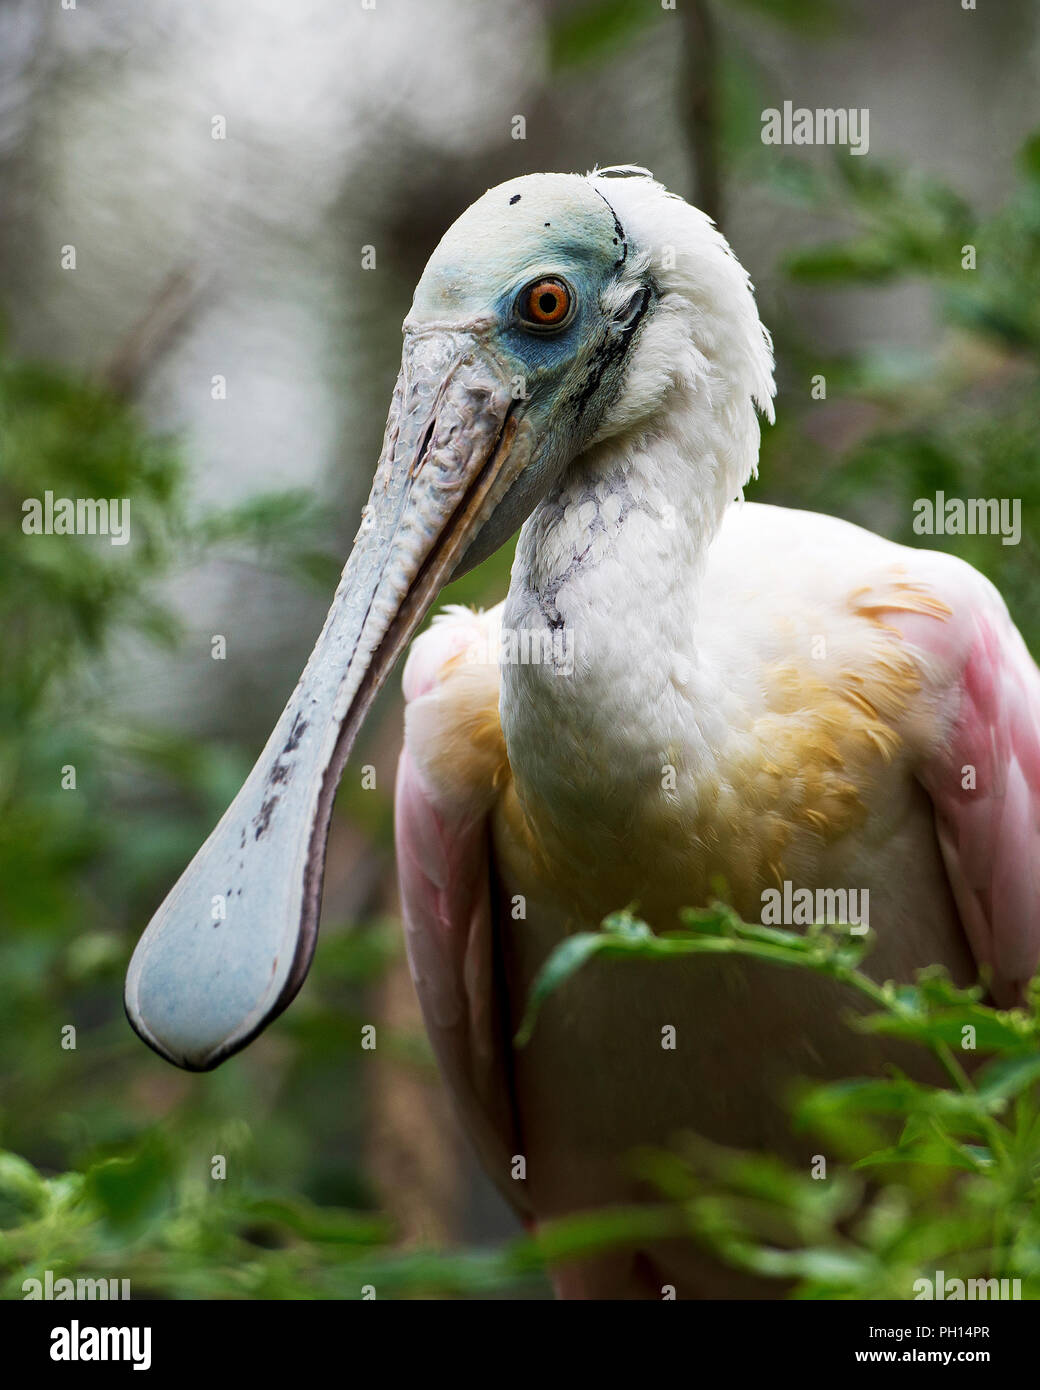 Roseate Spoonbill bird head close up profile view displaying long bill, eye, pink feathers plumage enjoying its environment and surrounding. Stock Photo